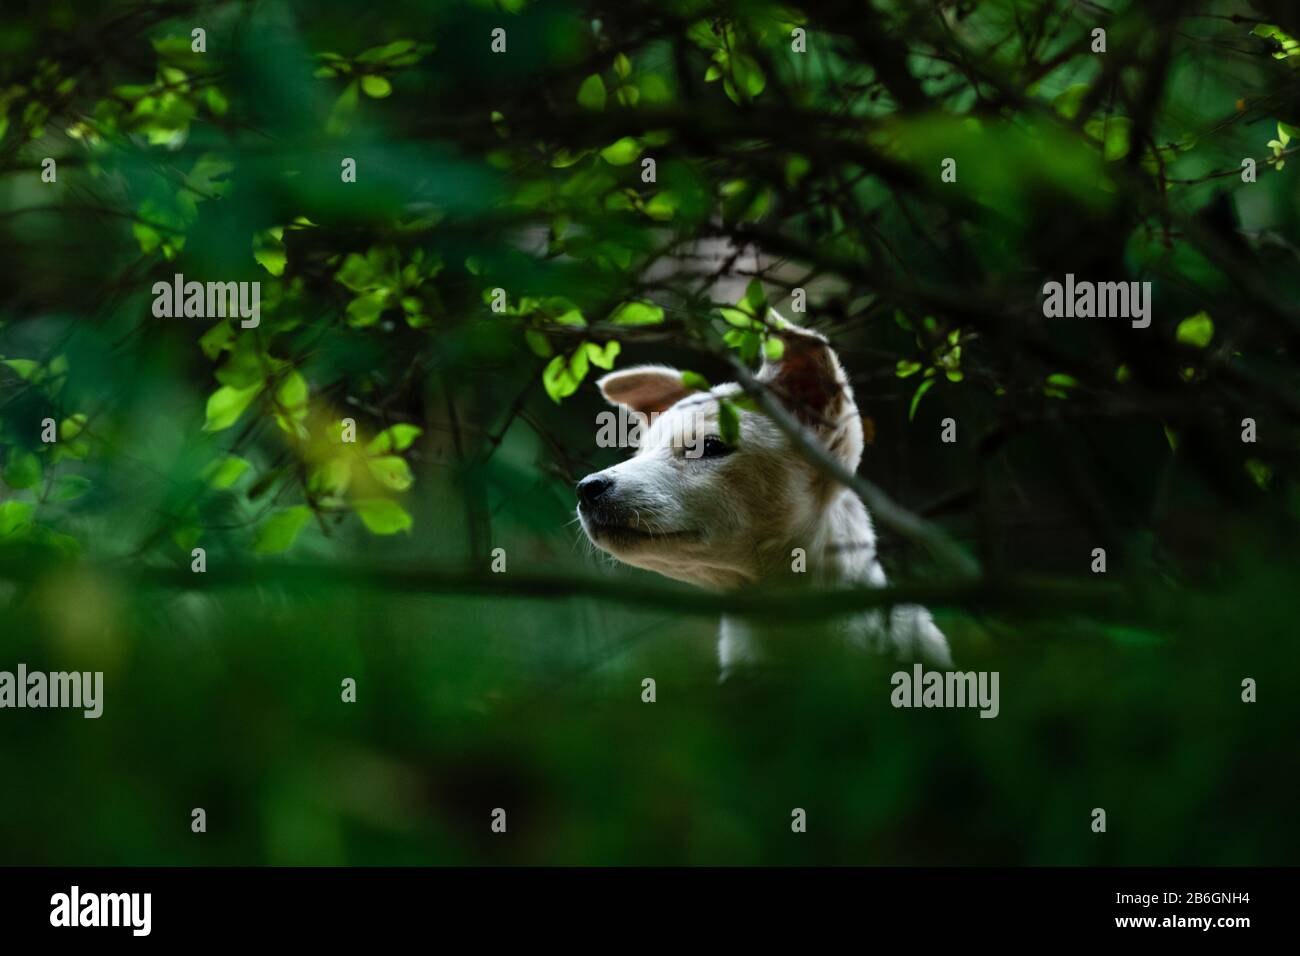 A dog in a park with greenery around and natural framing Stock Photo